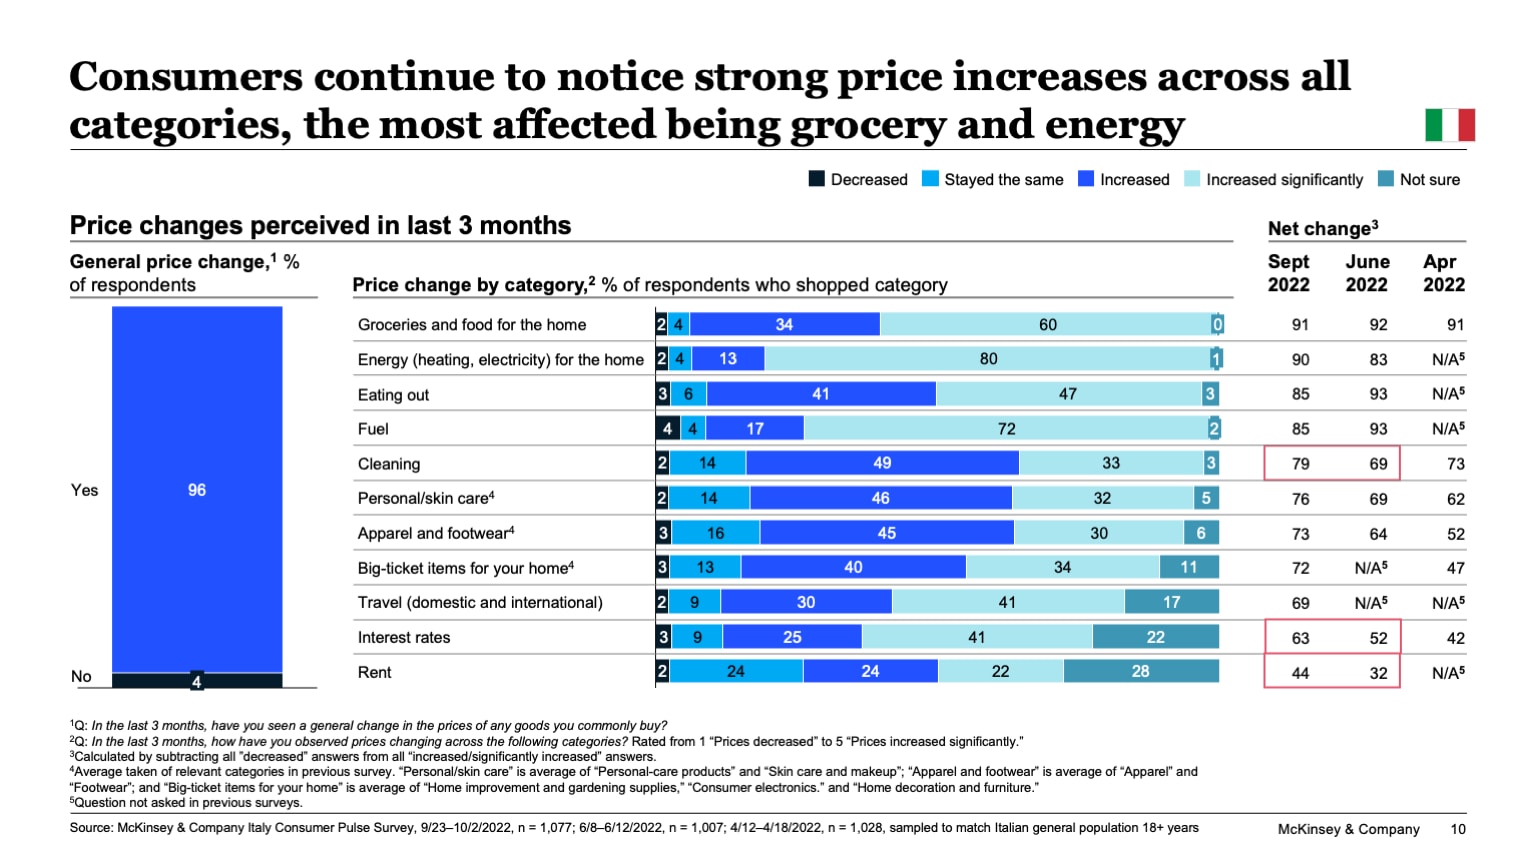 Consumers continue to notice strong price increases across all categories, the most affected being grocery and energy